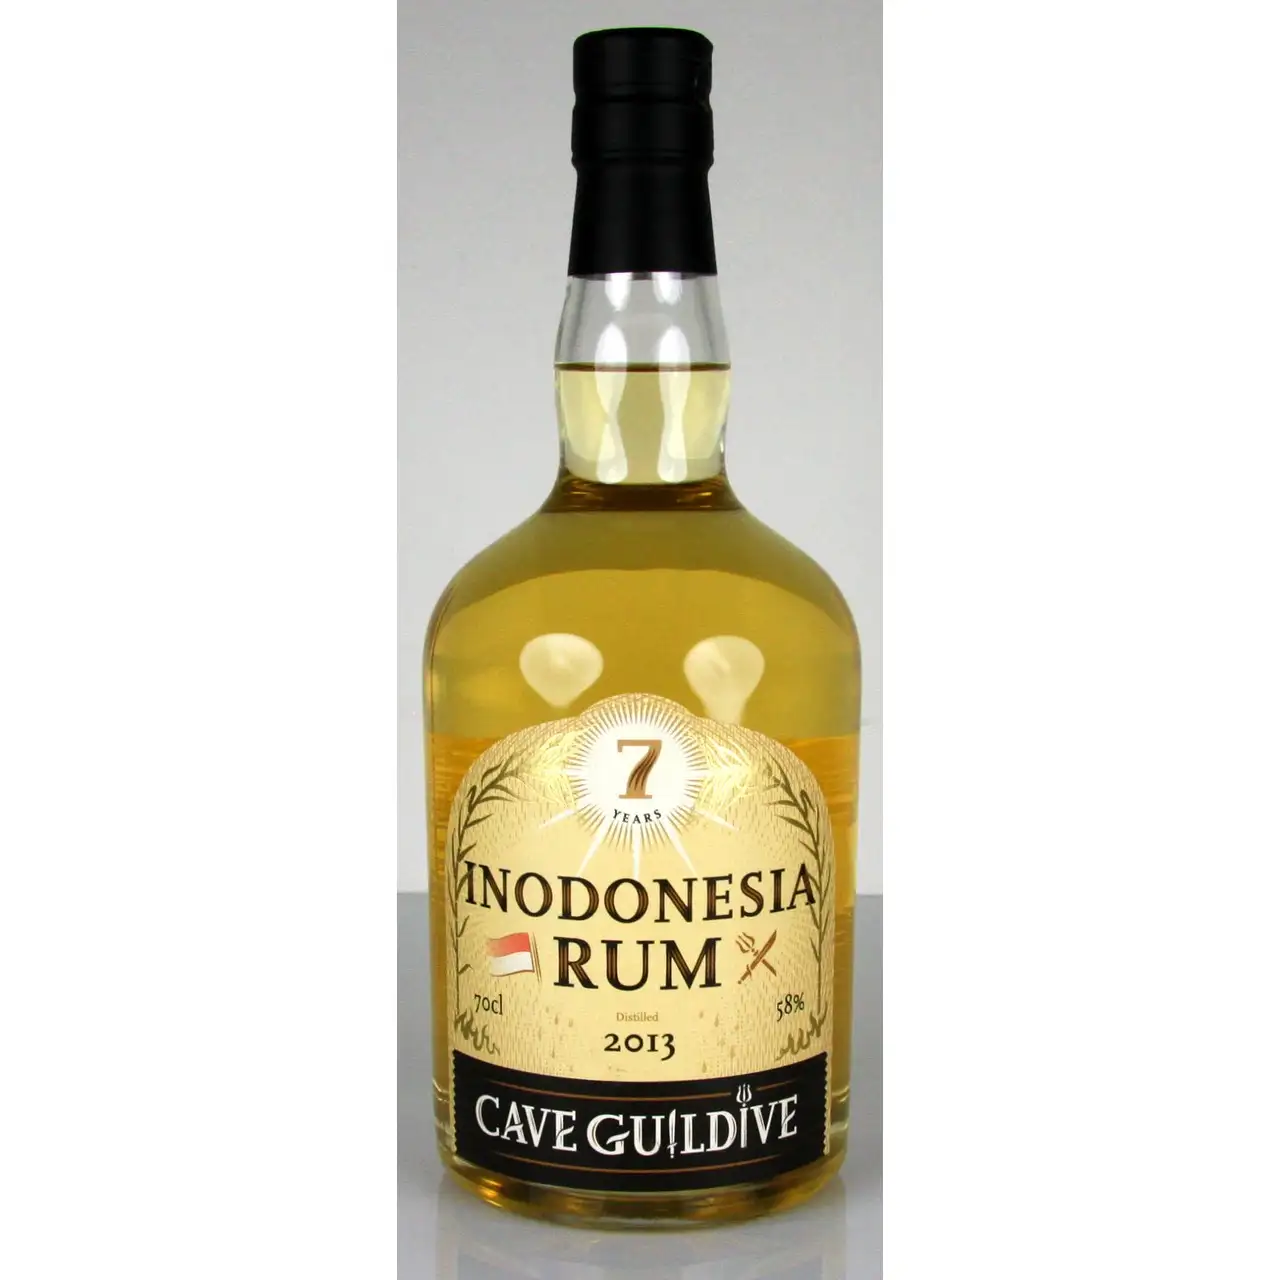 Image of the front of the bottle of the rum Indonesia Rum